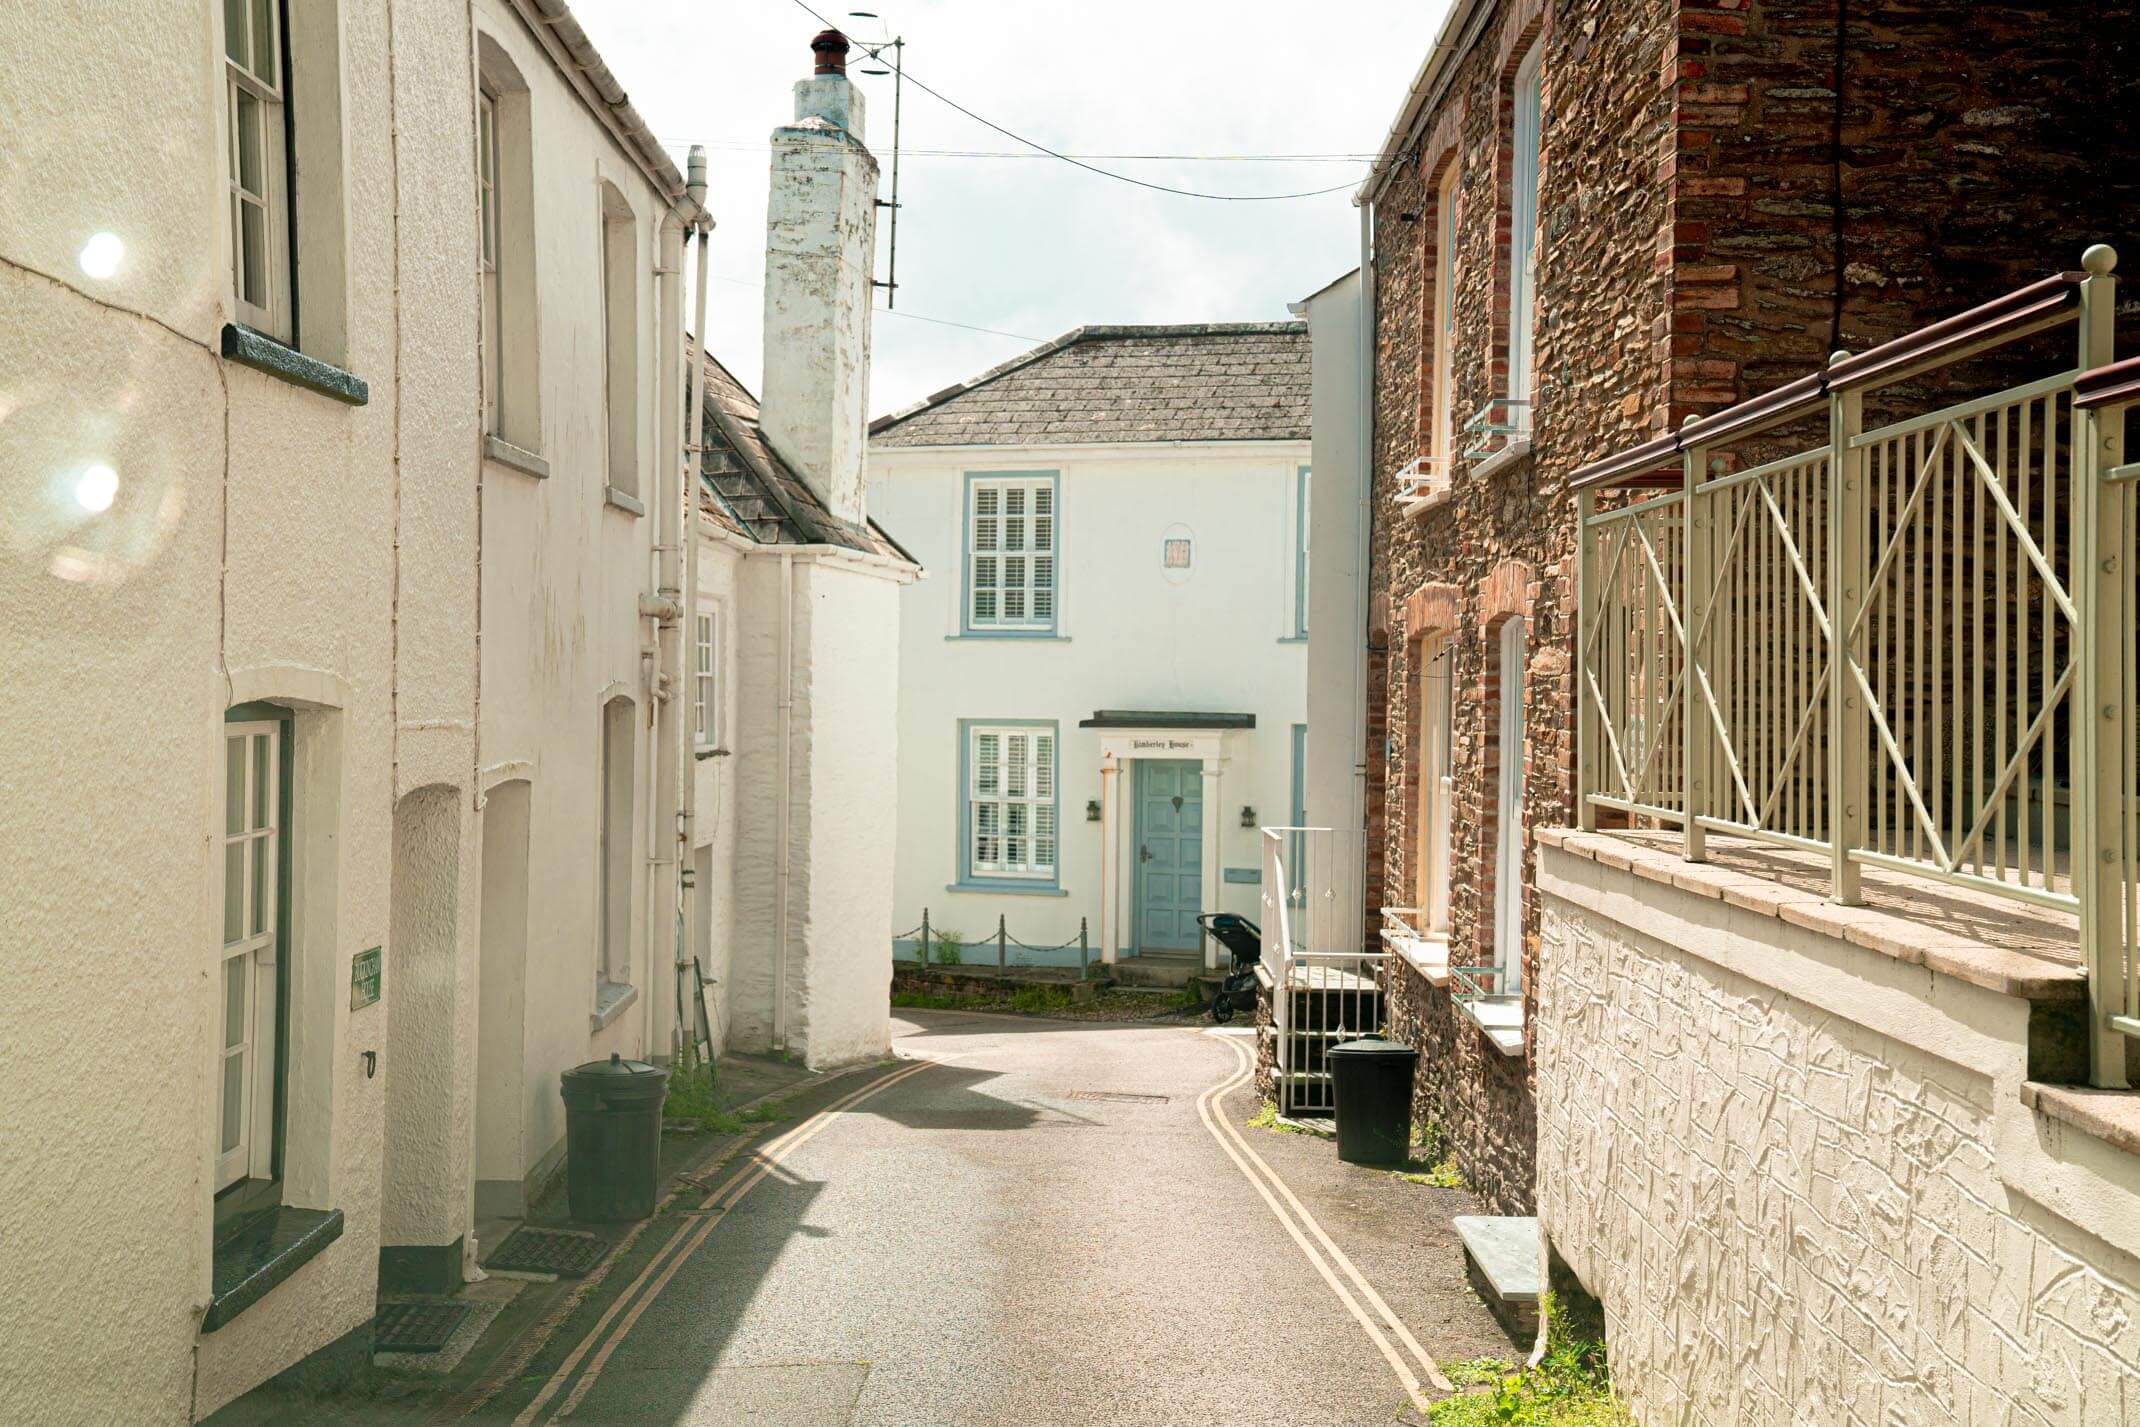 St Mawes: A guide to the most beautiful towns in Cornwall, England